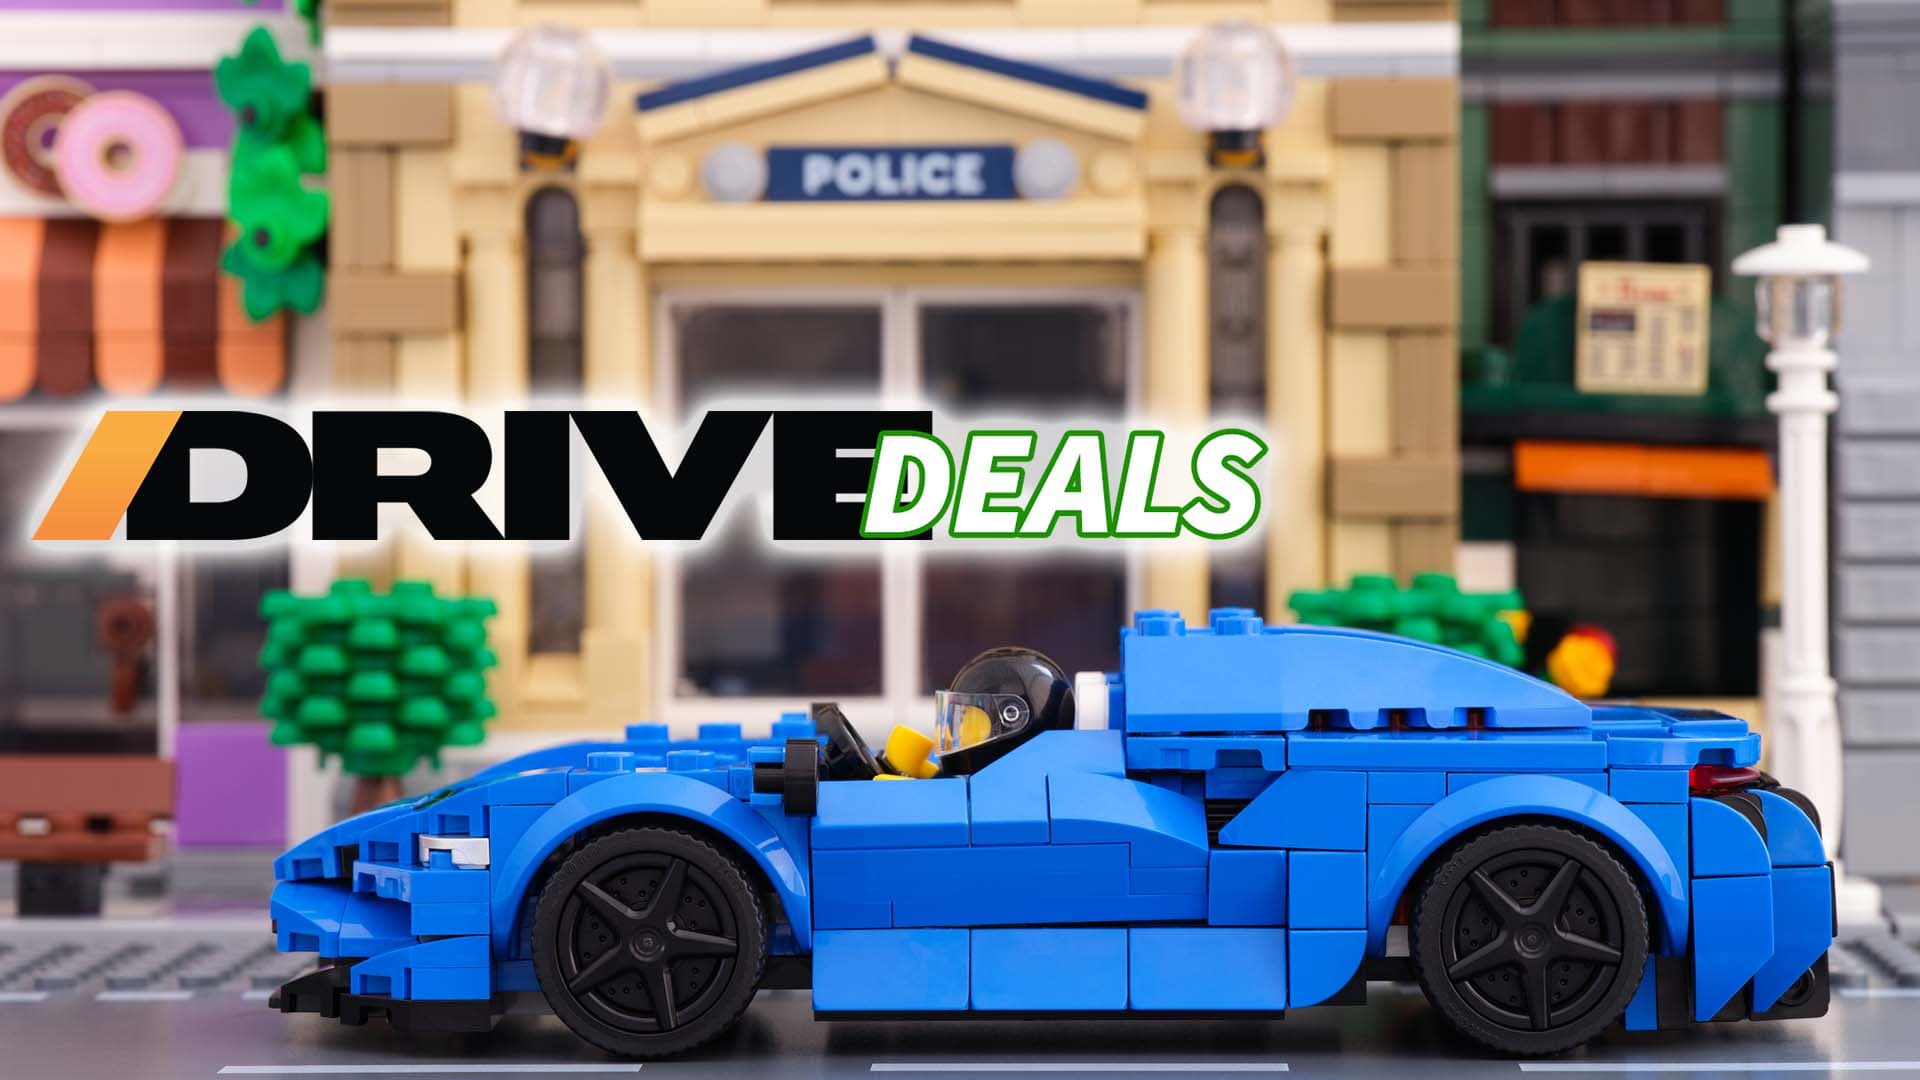 Save Big on Lego Speed Champions Deals from Amazon and Walmart